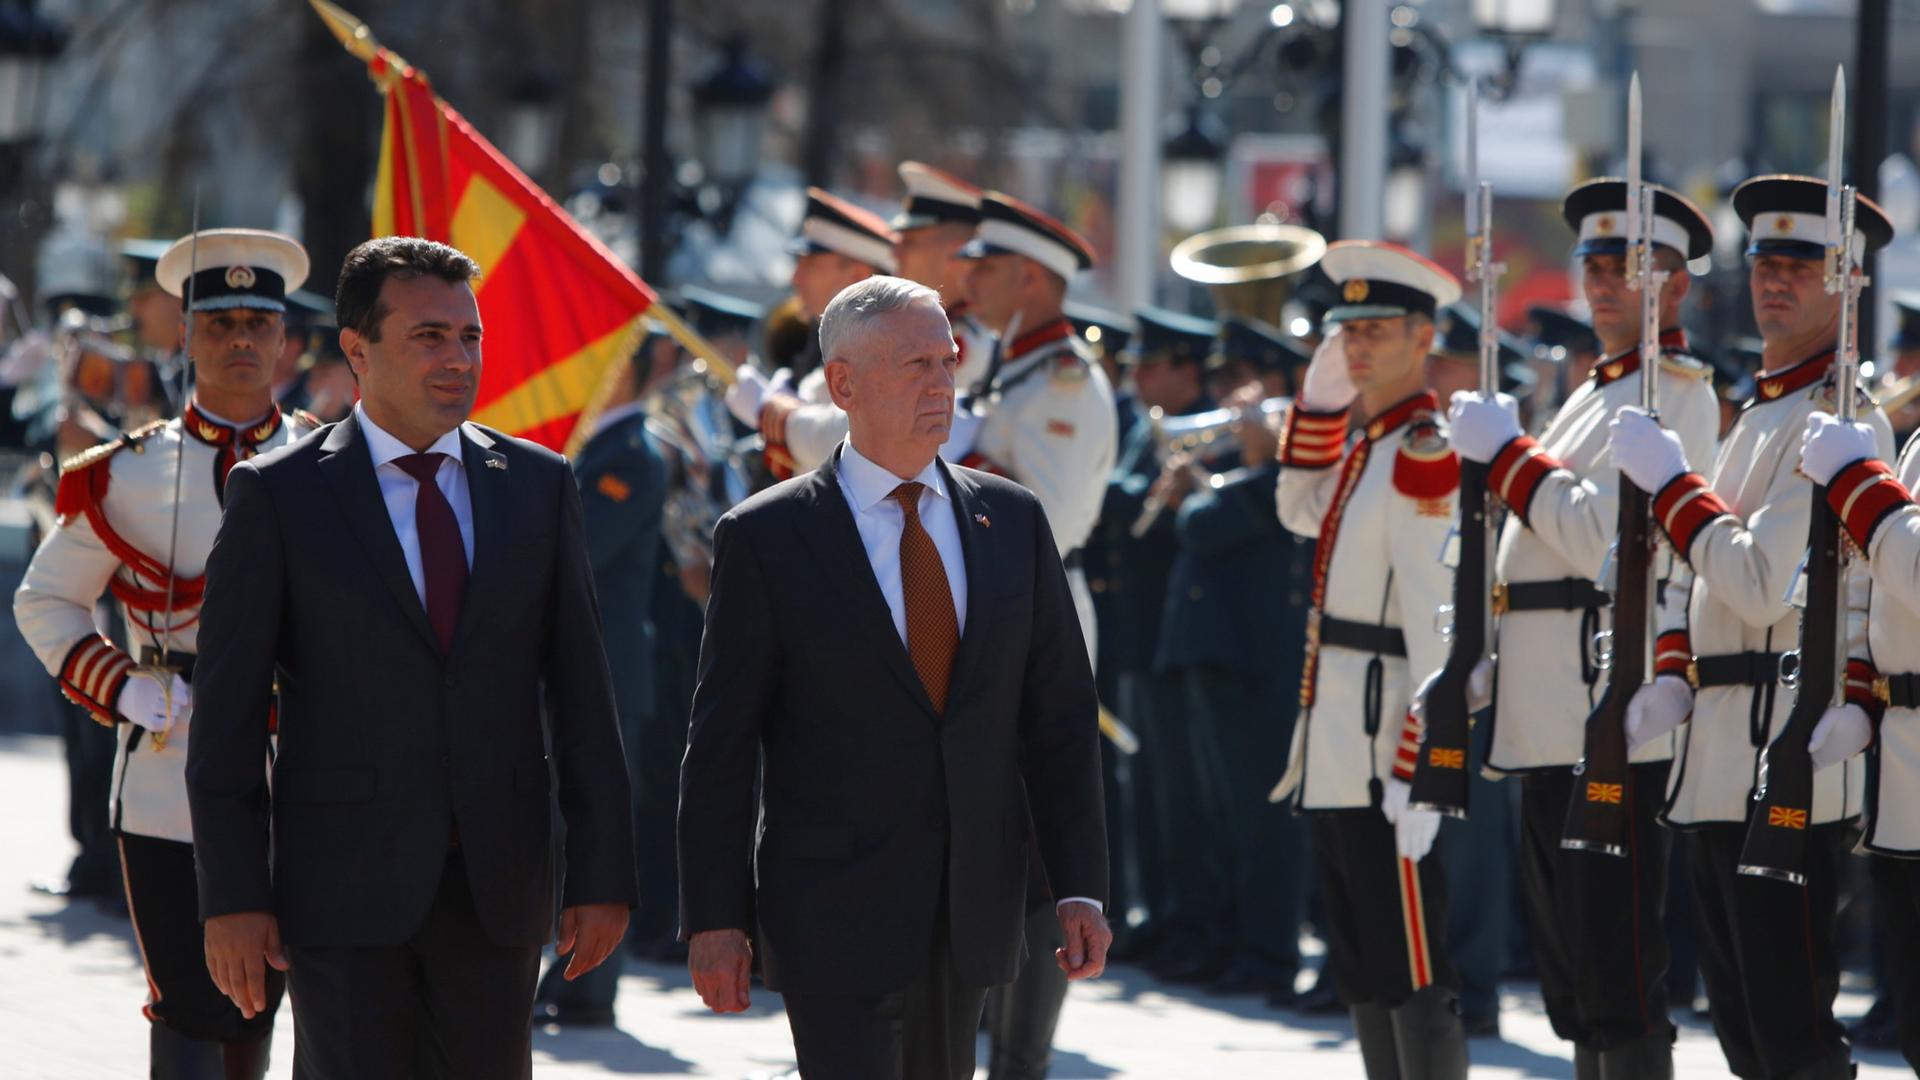 Macedonian Prime Minister Zoran Zaev and US Secretary of Defense James Mattis are shown walking past military officials in dress uniforms during a welcoming ceremony in Skopje.